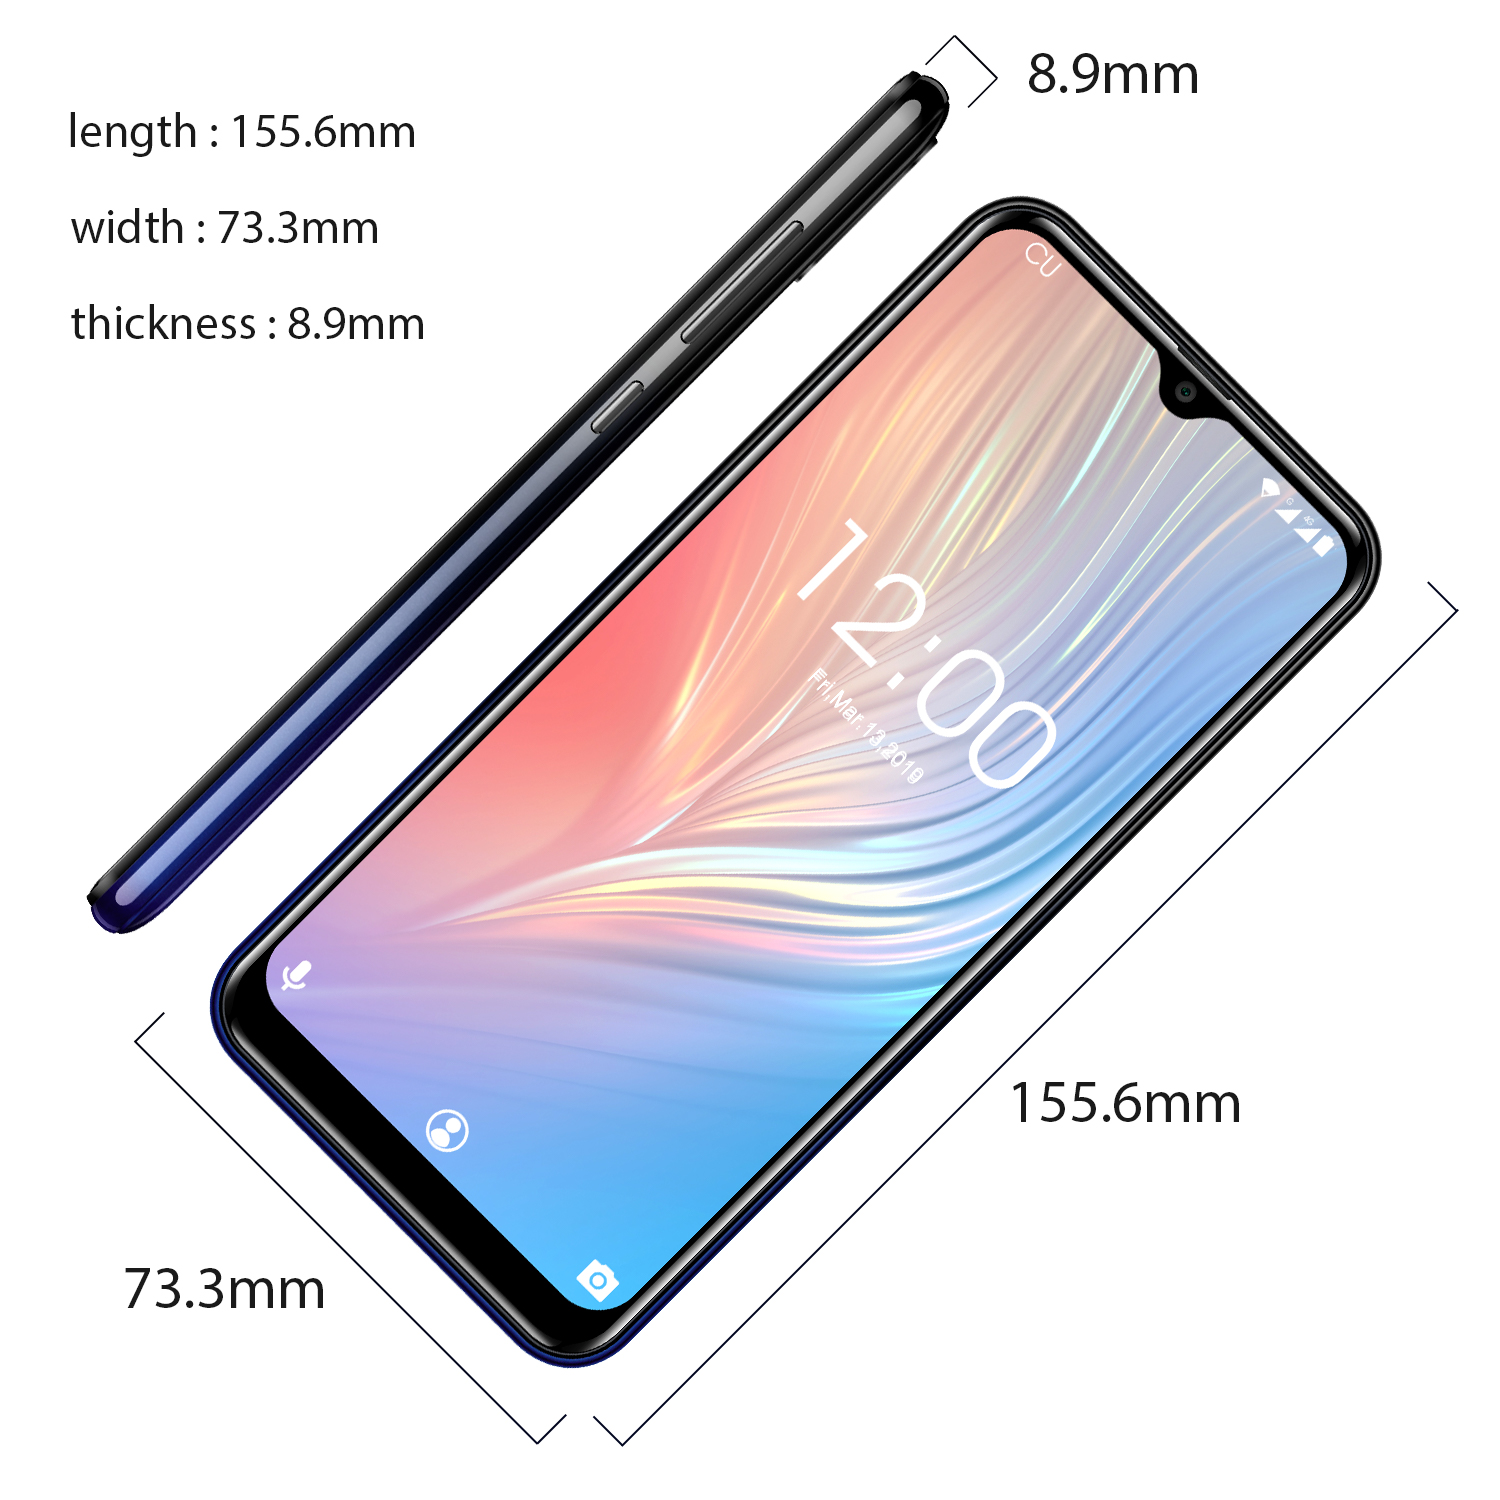 Oukitel  c15 pro 6.1" Mobile phone 3+32GB Android 9.0 support5G/2.4G wifi with Face ID